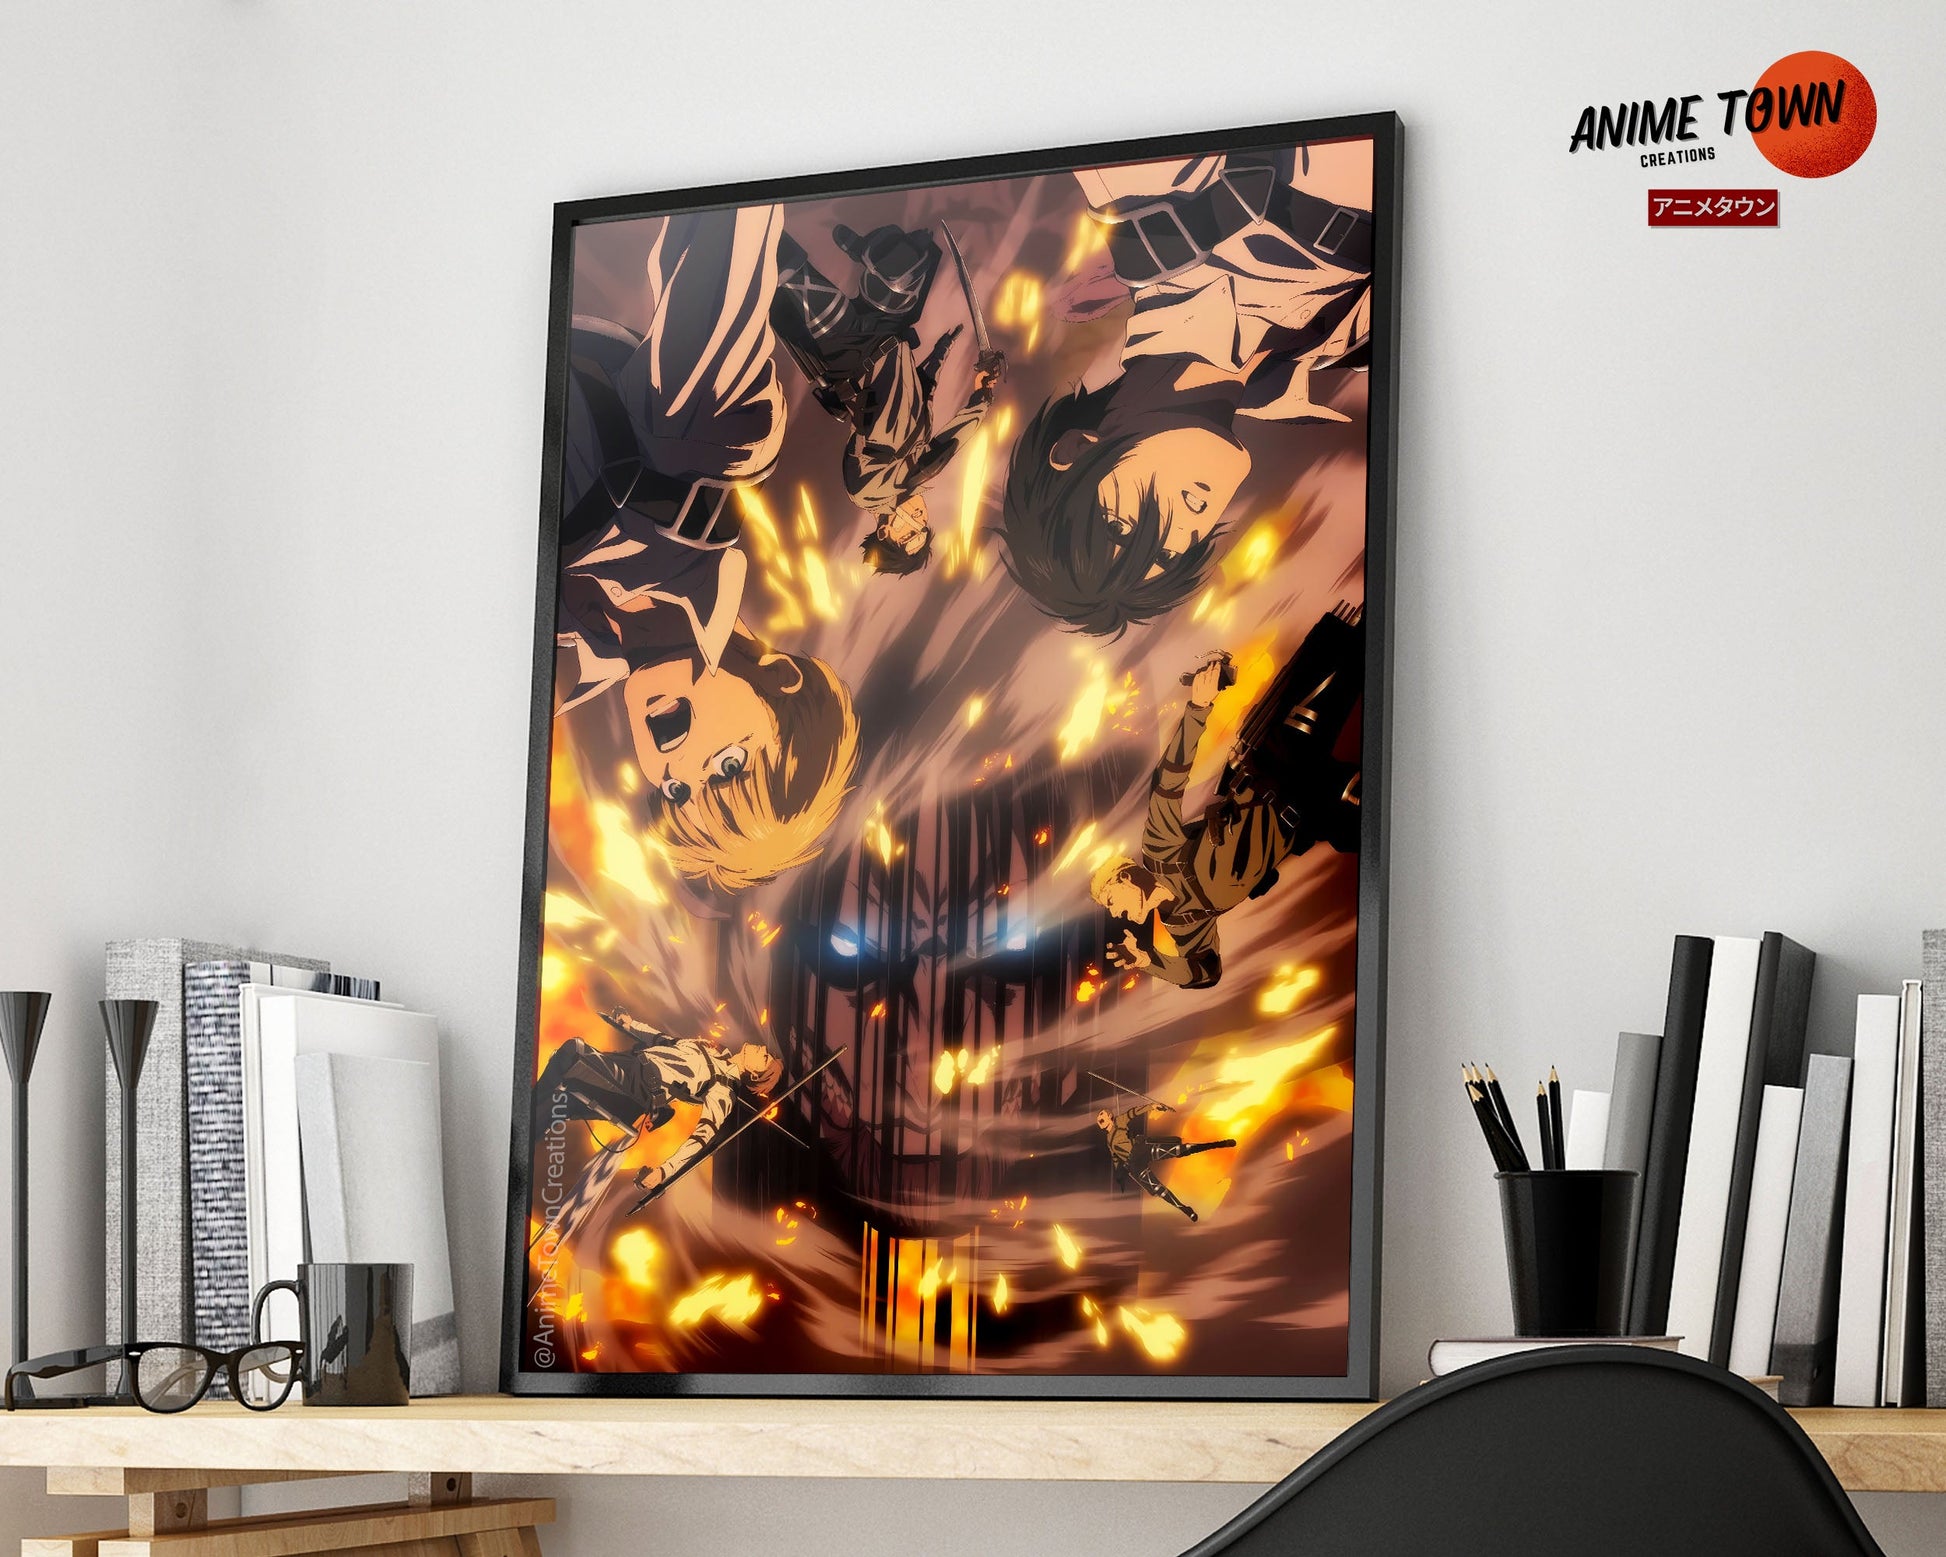 Anime Town Creations Poster Attack on Titan Final Season Part 3 11" x 17" Home Goods - Anime Attack on Titan Poster